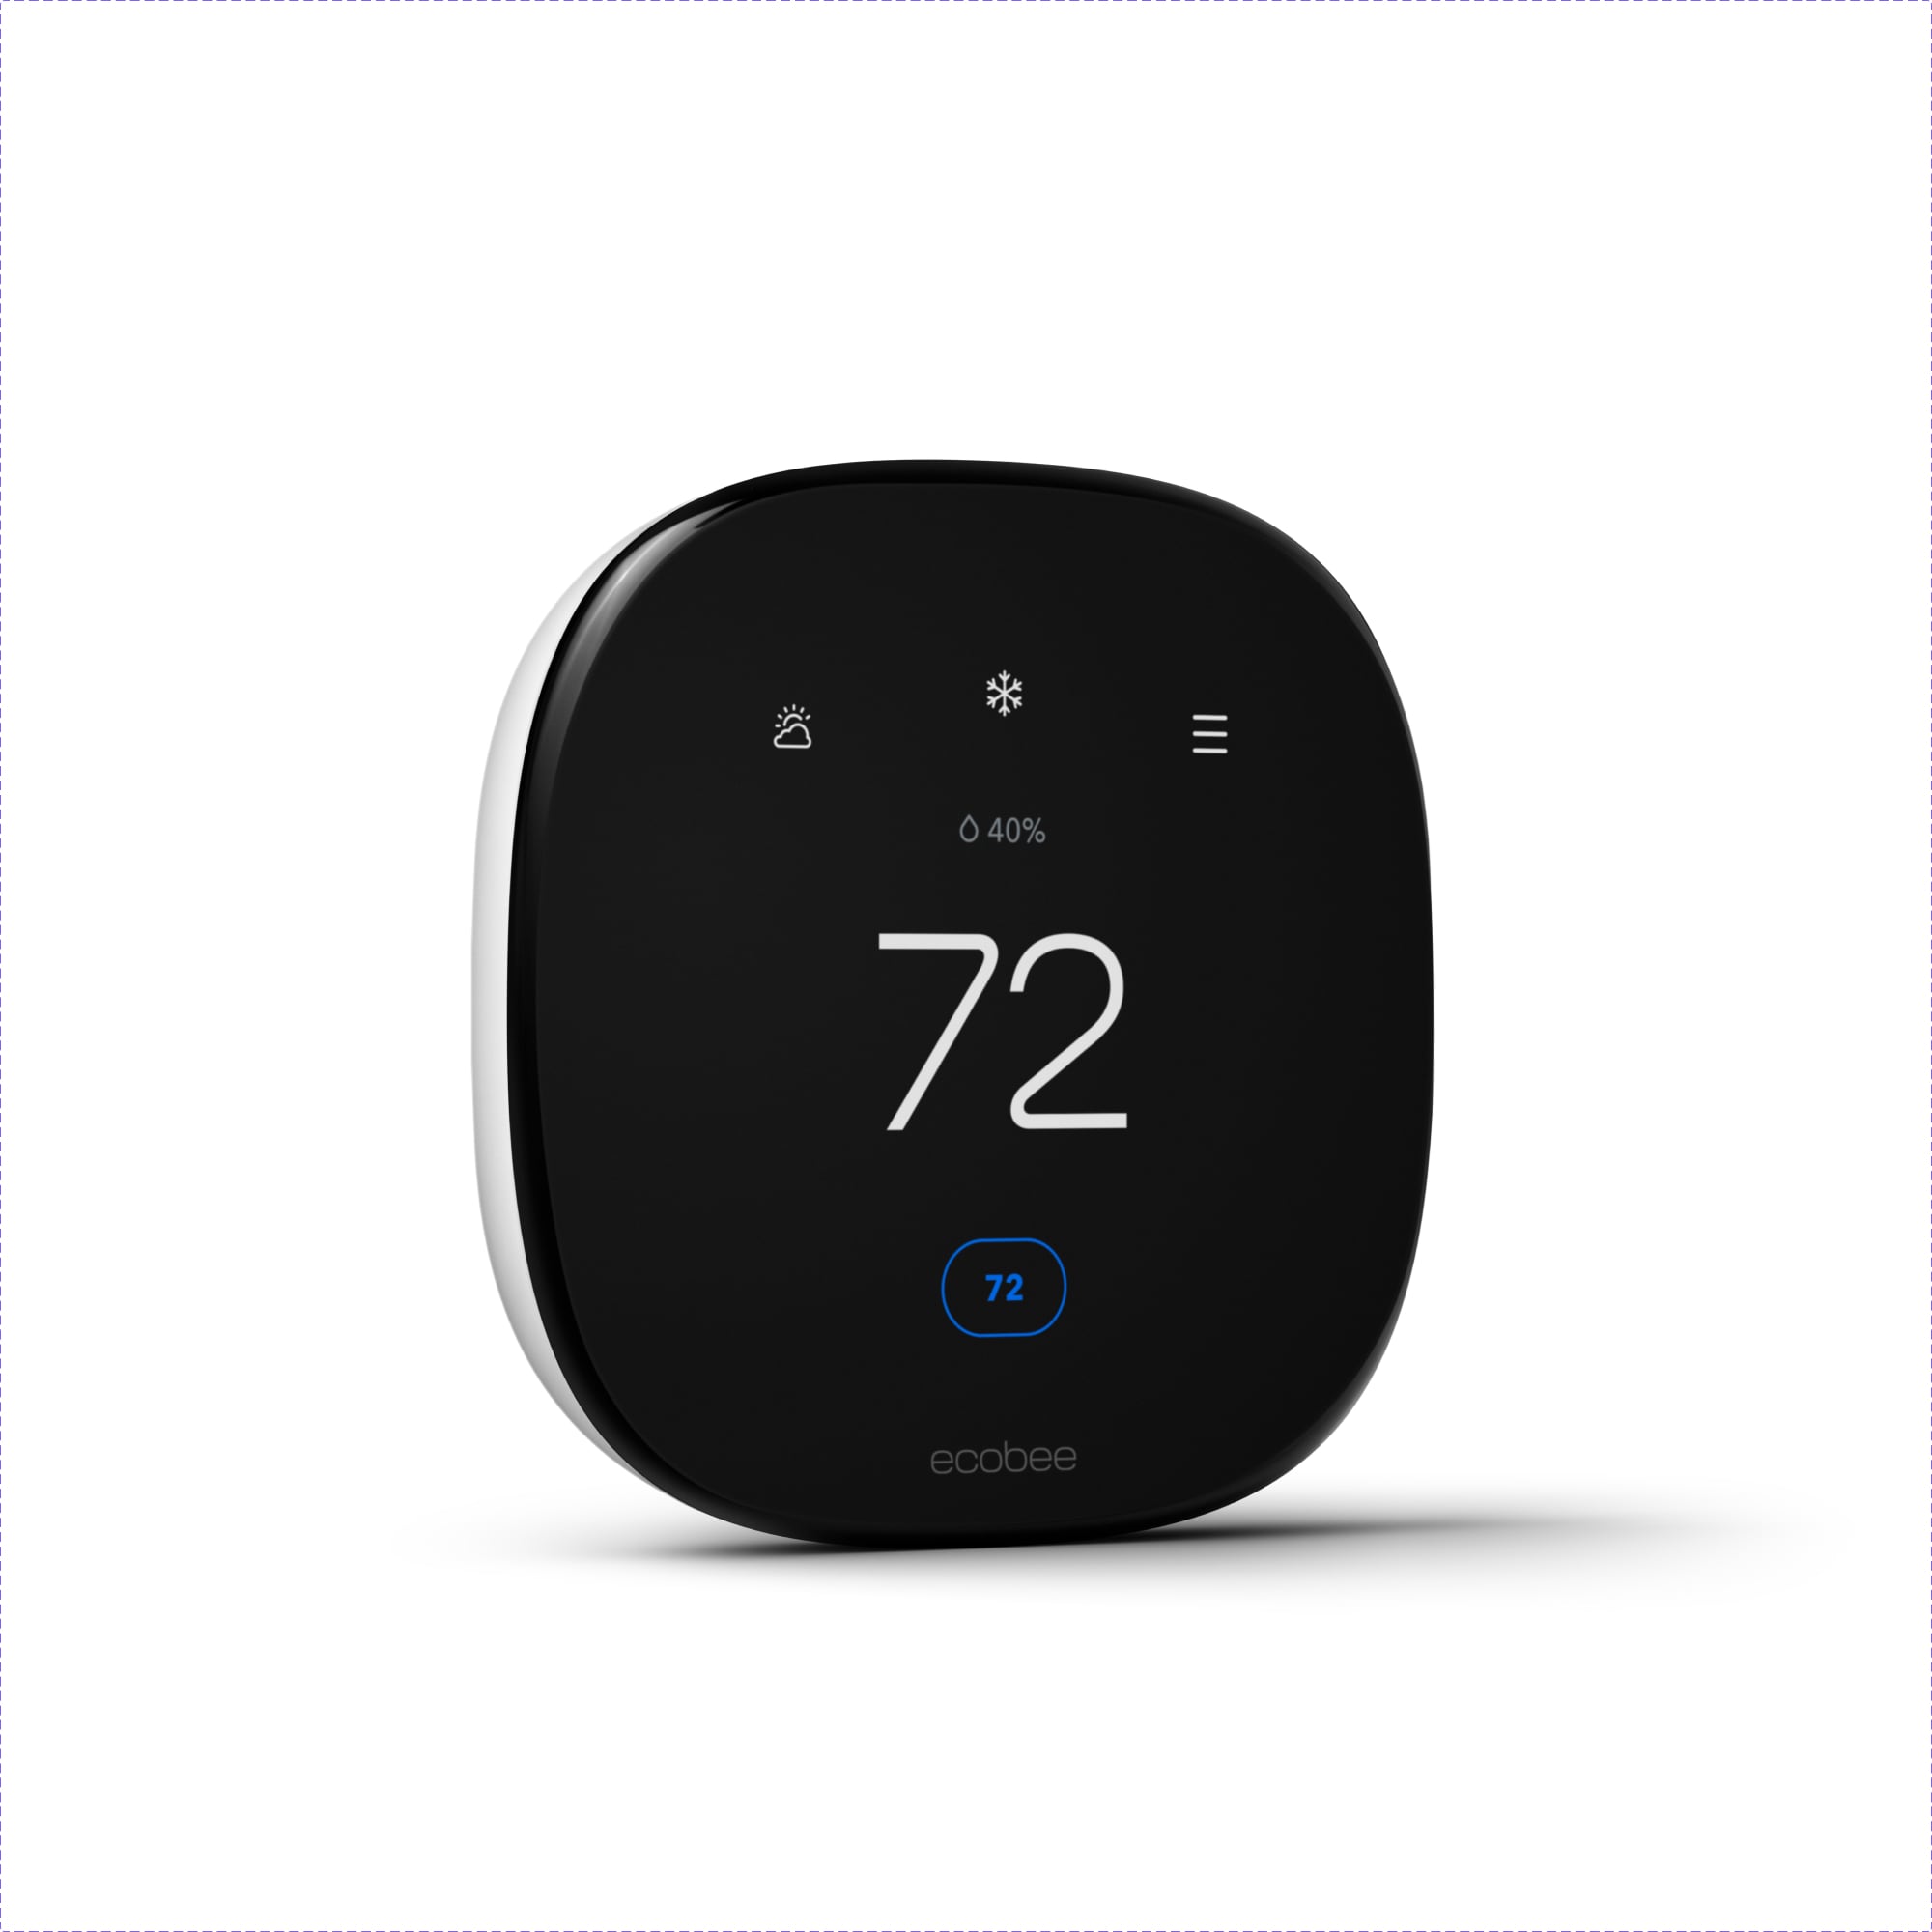 Smarther: the connected thermostat